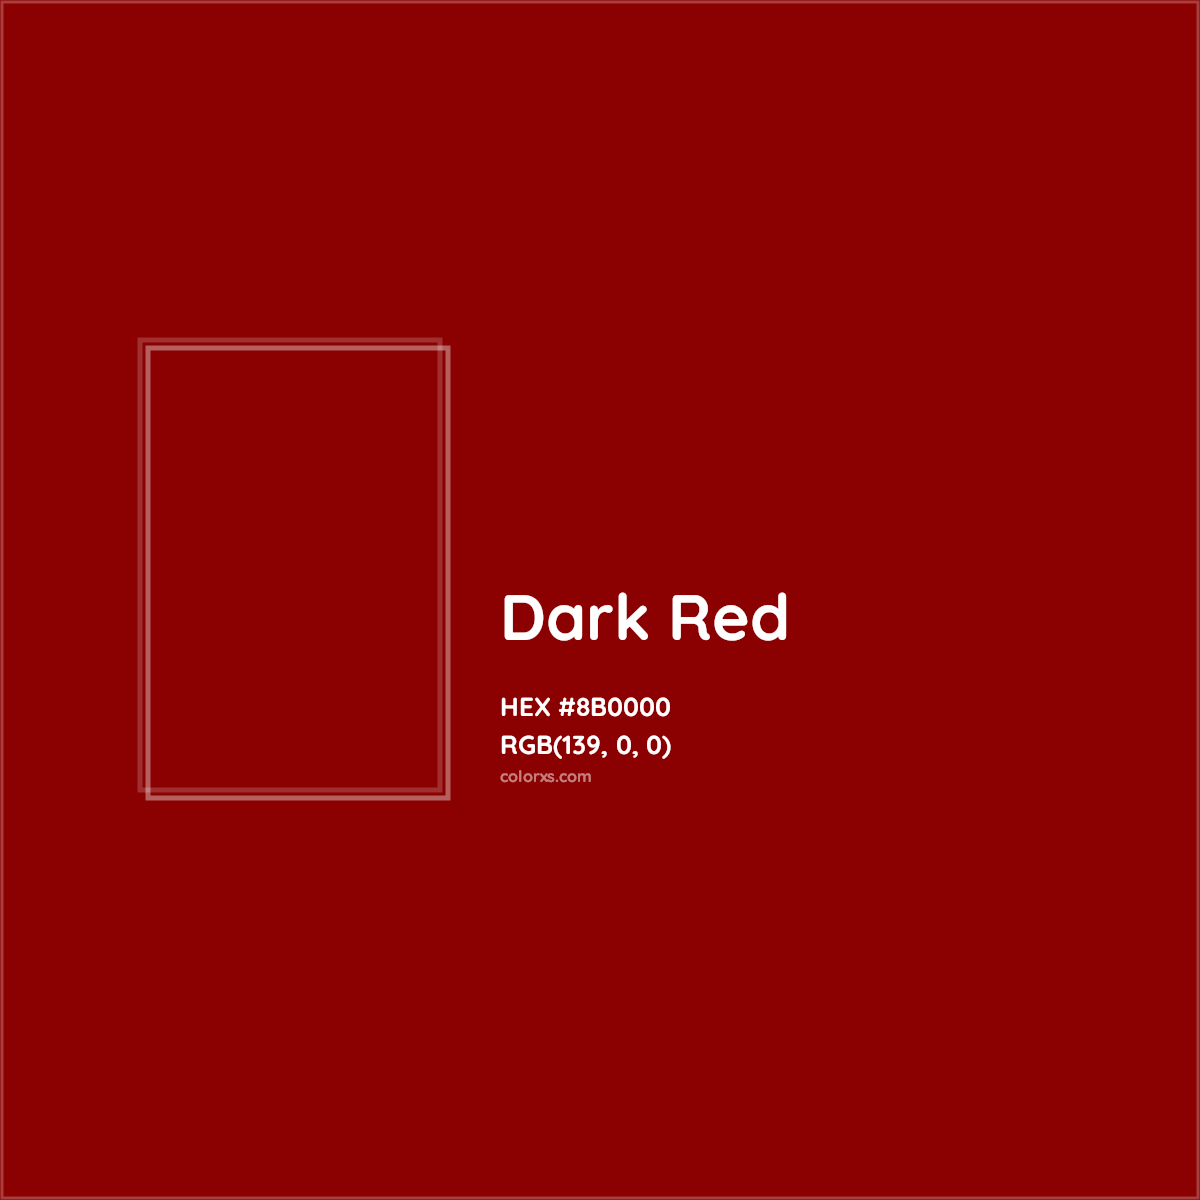 About Dark Red - Color codes, similar colors and paints 